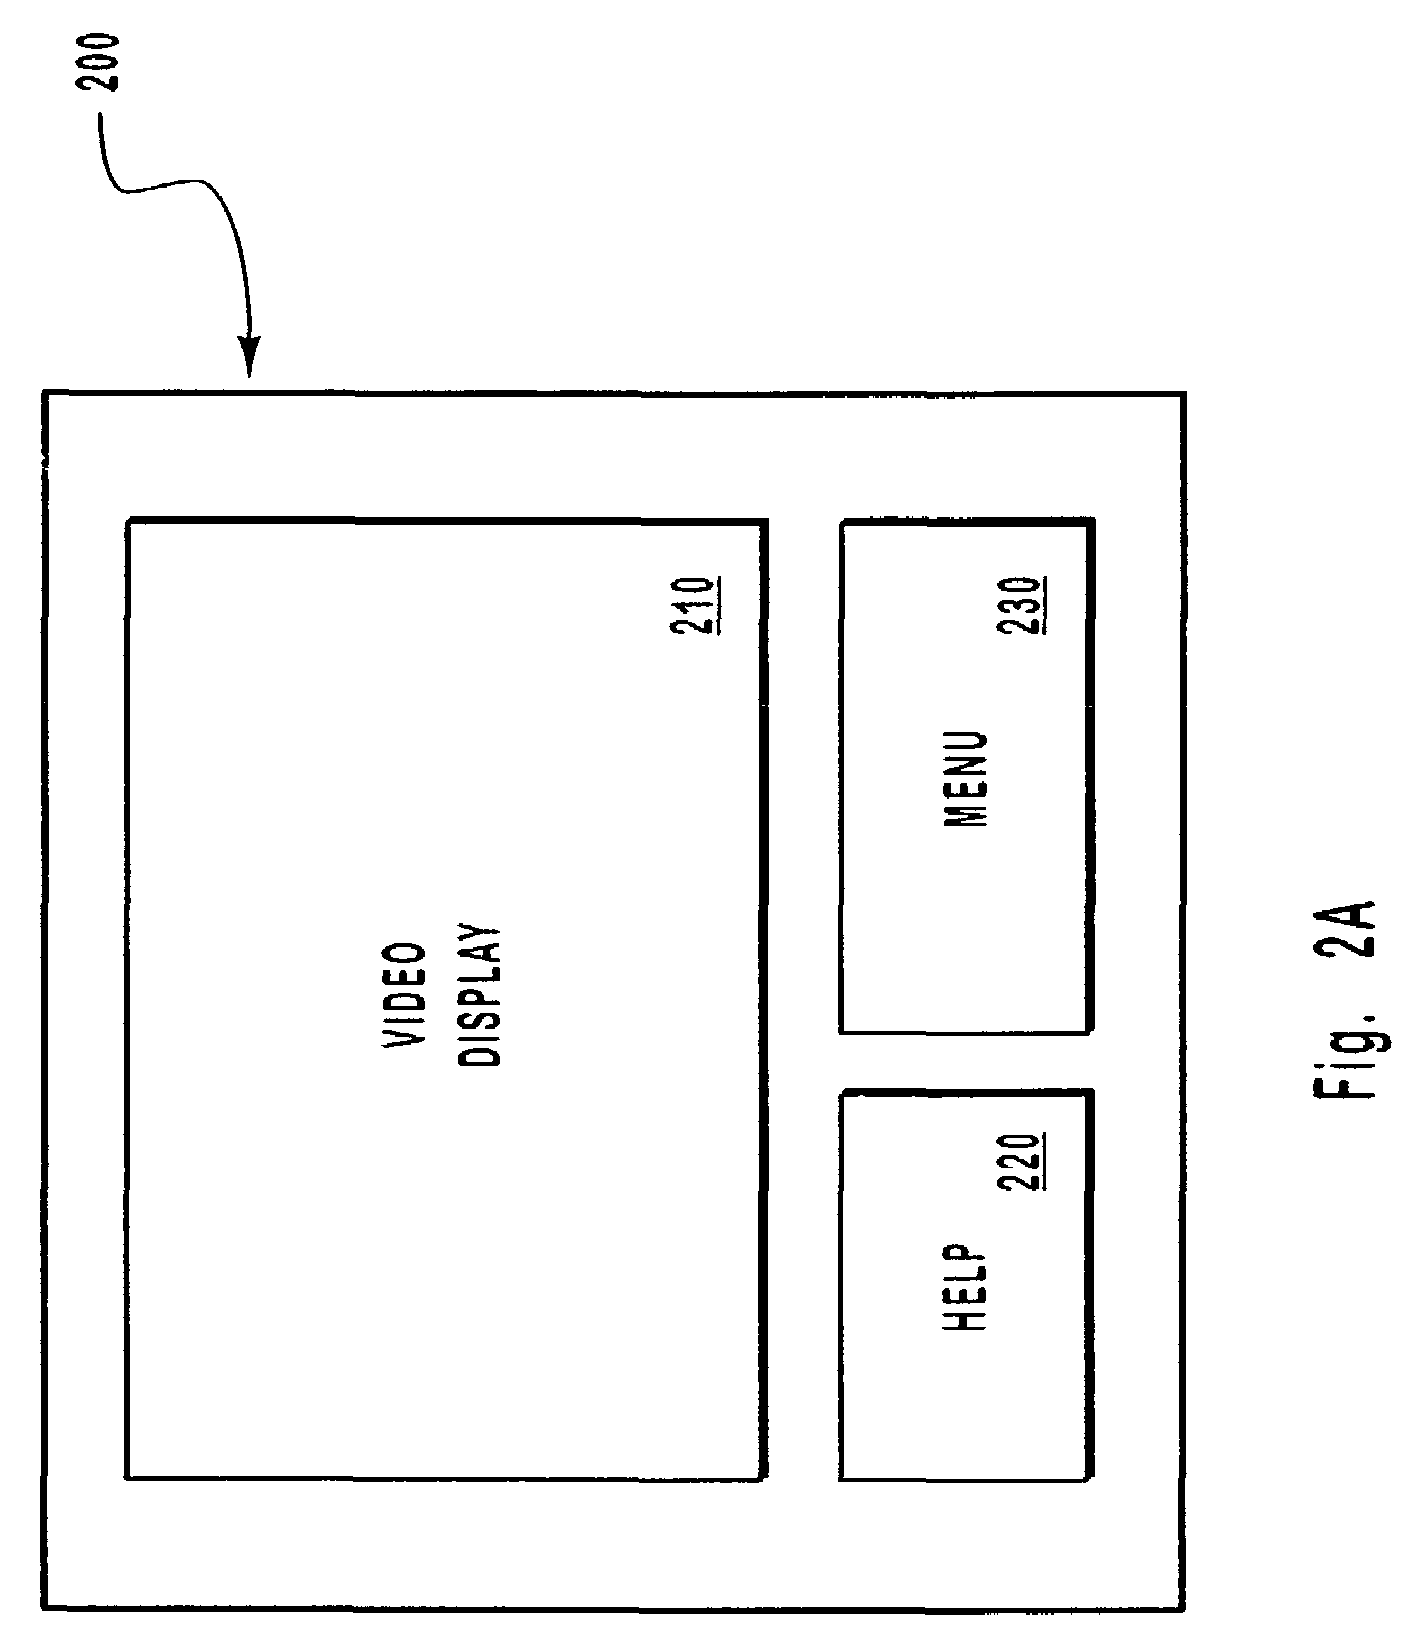 Categorical user interface for navigation within a grid